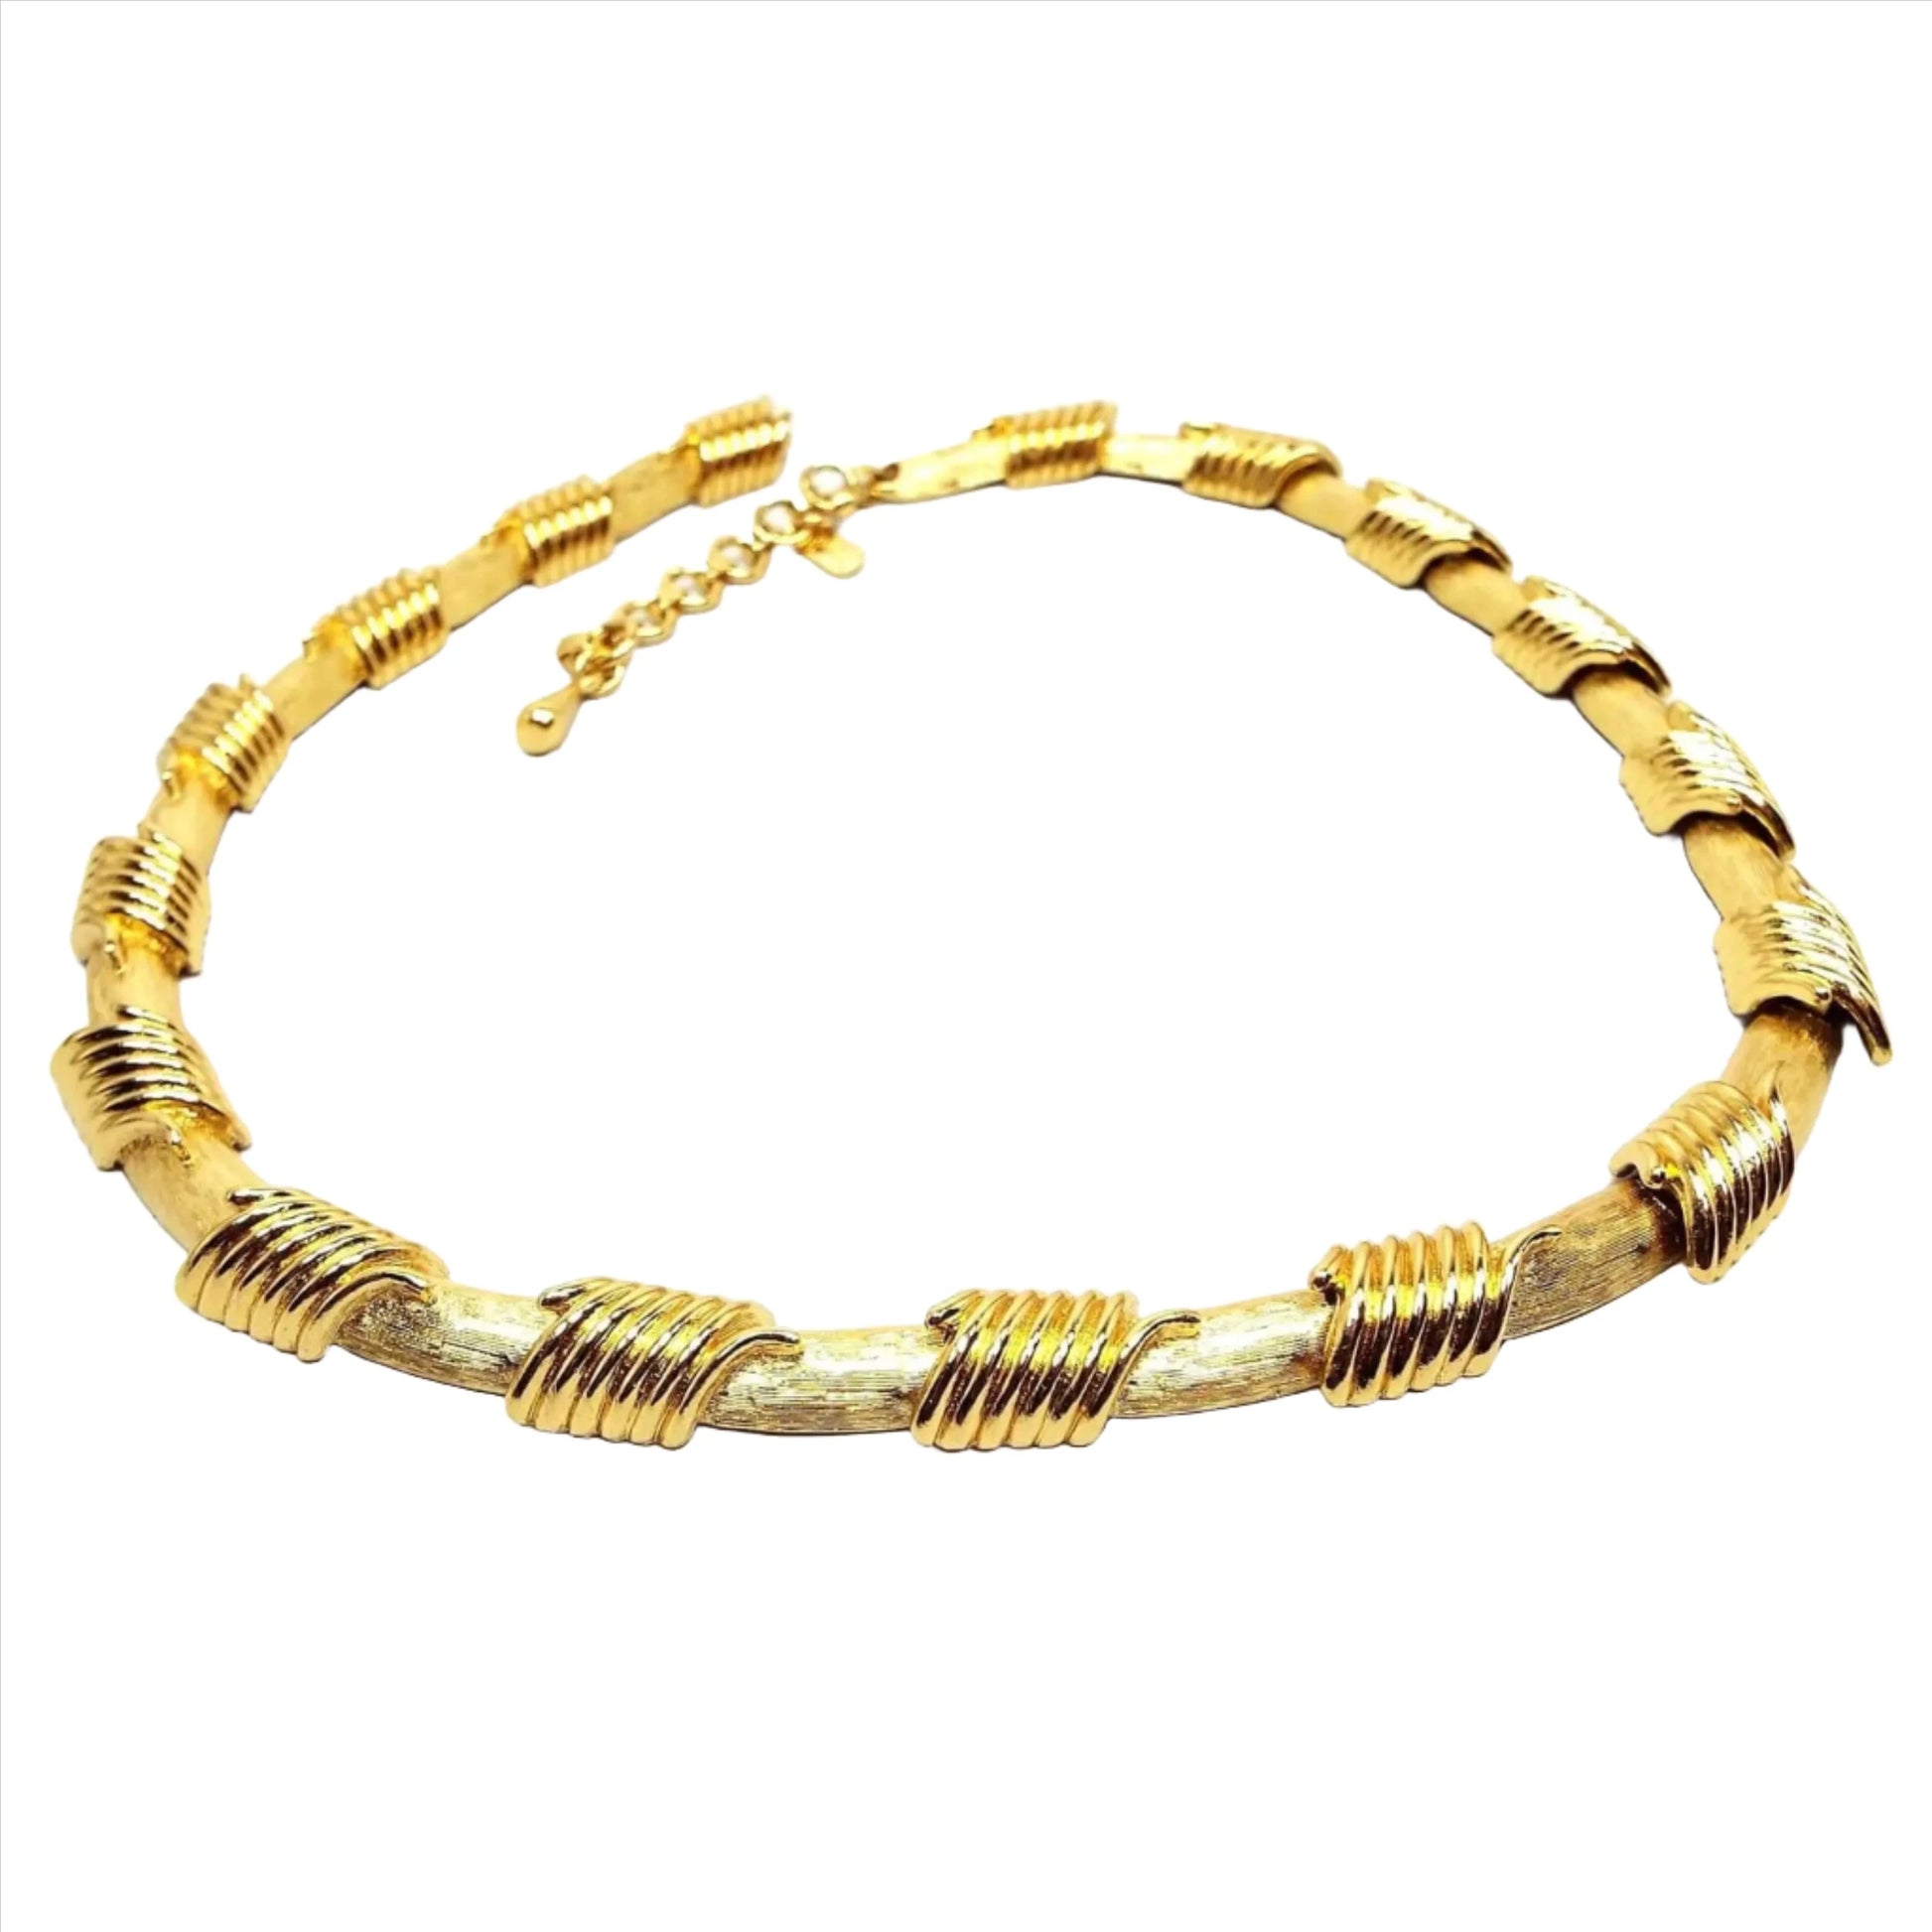 Front view of the Monet retro vintage link necklace. The metal is gold tone in color. There is a hook clasp at the end. The links have a matte brushed texture with shiny coil like areas above where the links join together.